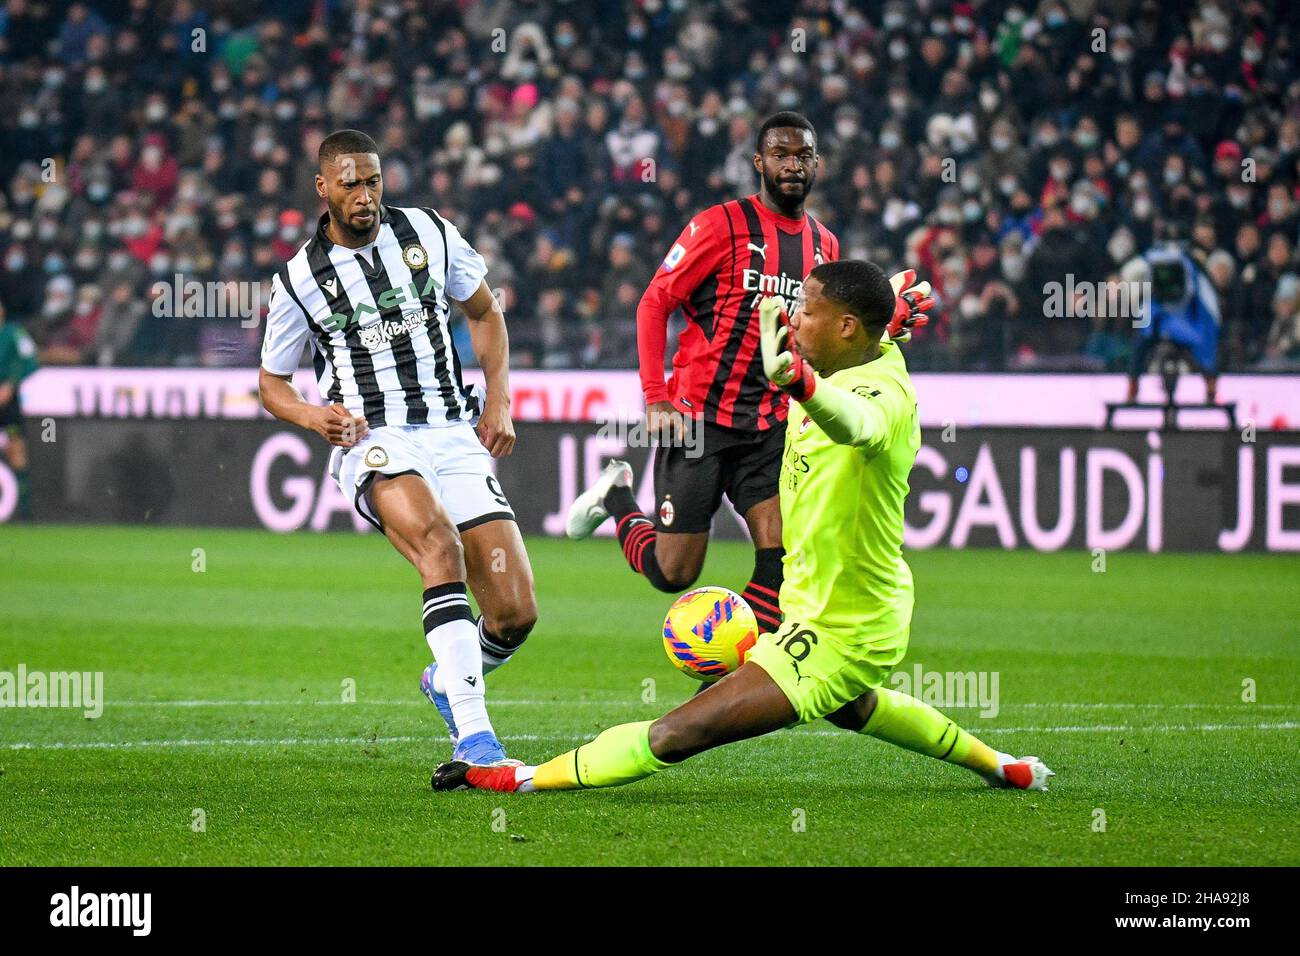 Udine, Italy. 11th Dec, 2021. Udinese's Norberto Bercique Gomes Betuncal scores a goal 1-0 during Udinese Calcio vs AC Milan, italian soccer Serie A match in Udine, Italy, December 11 2021 Credit: Independent Photo Agency/Alamy Live News Stock Photo